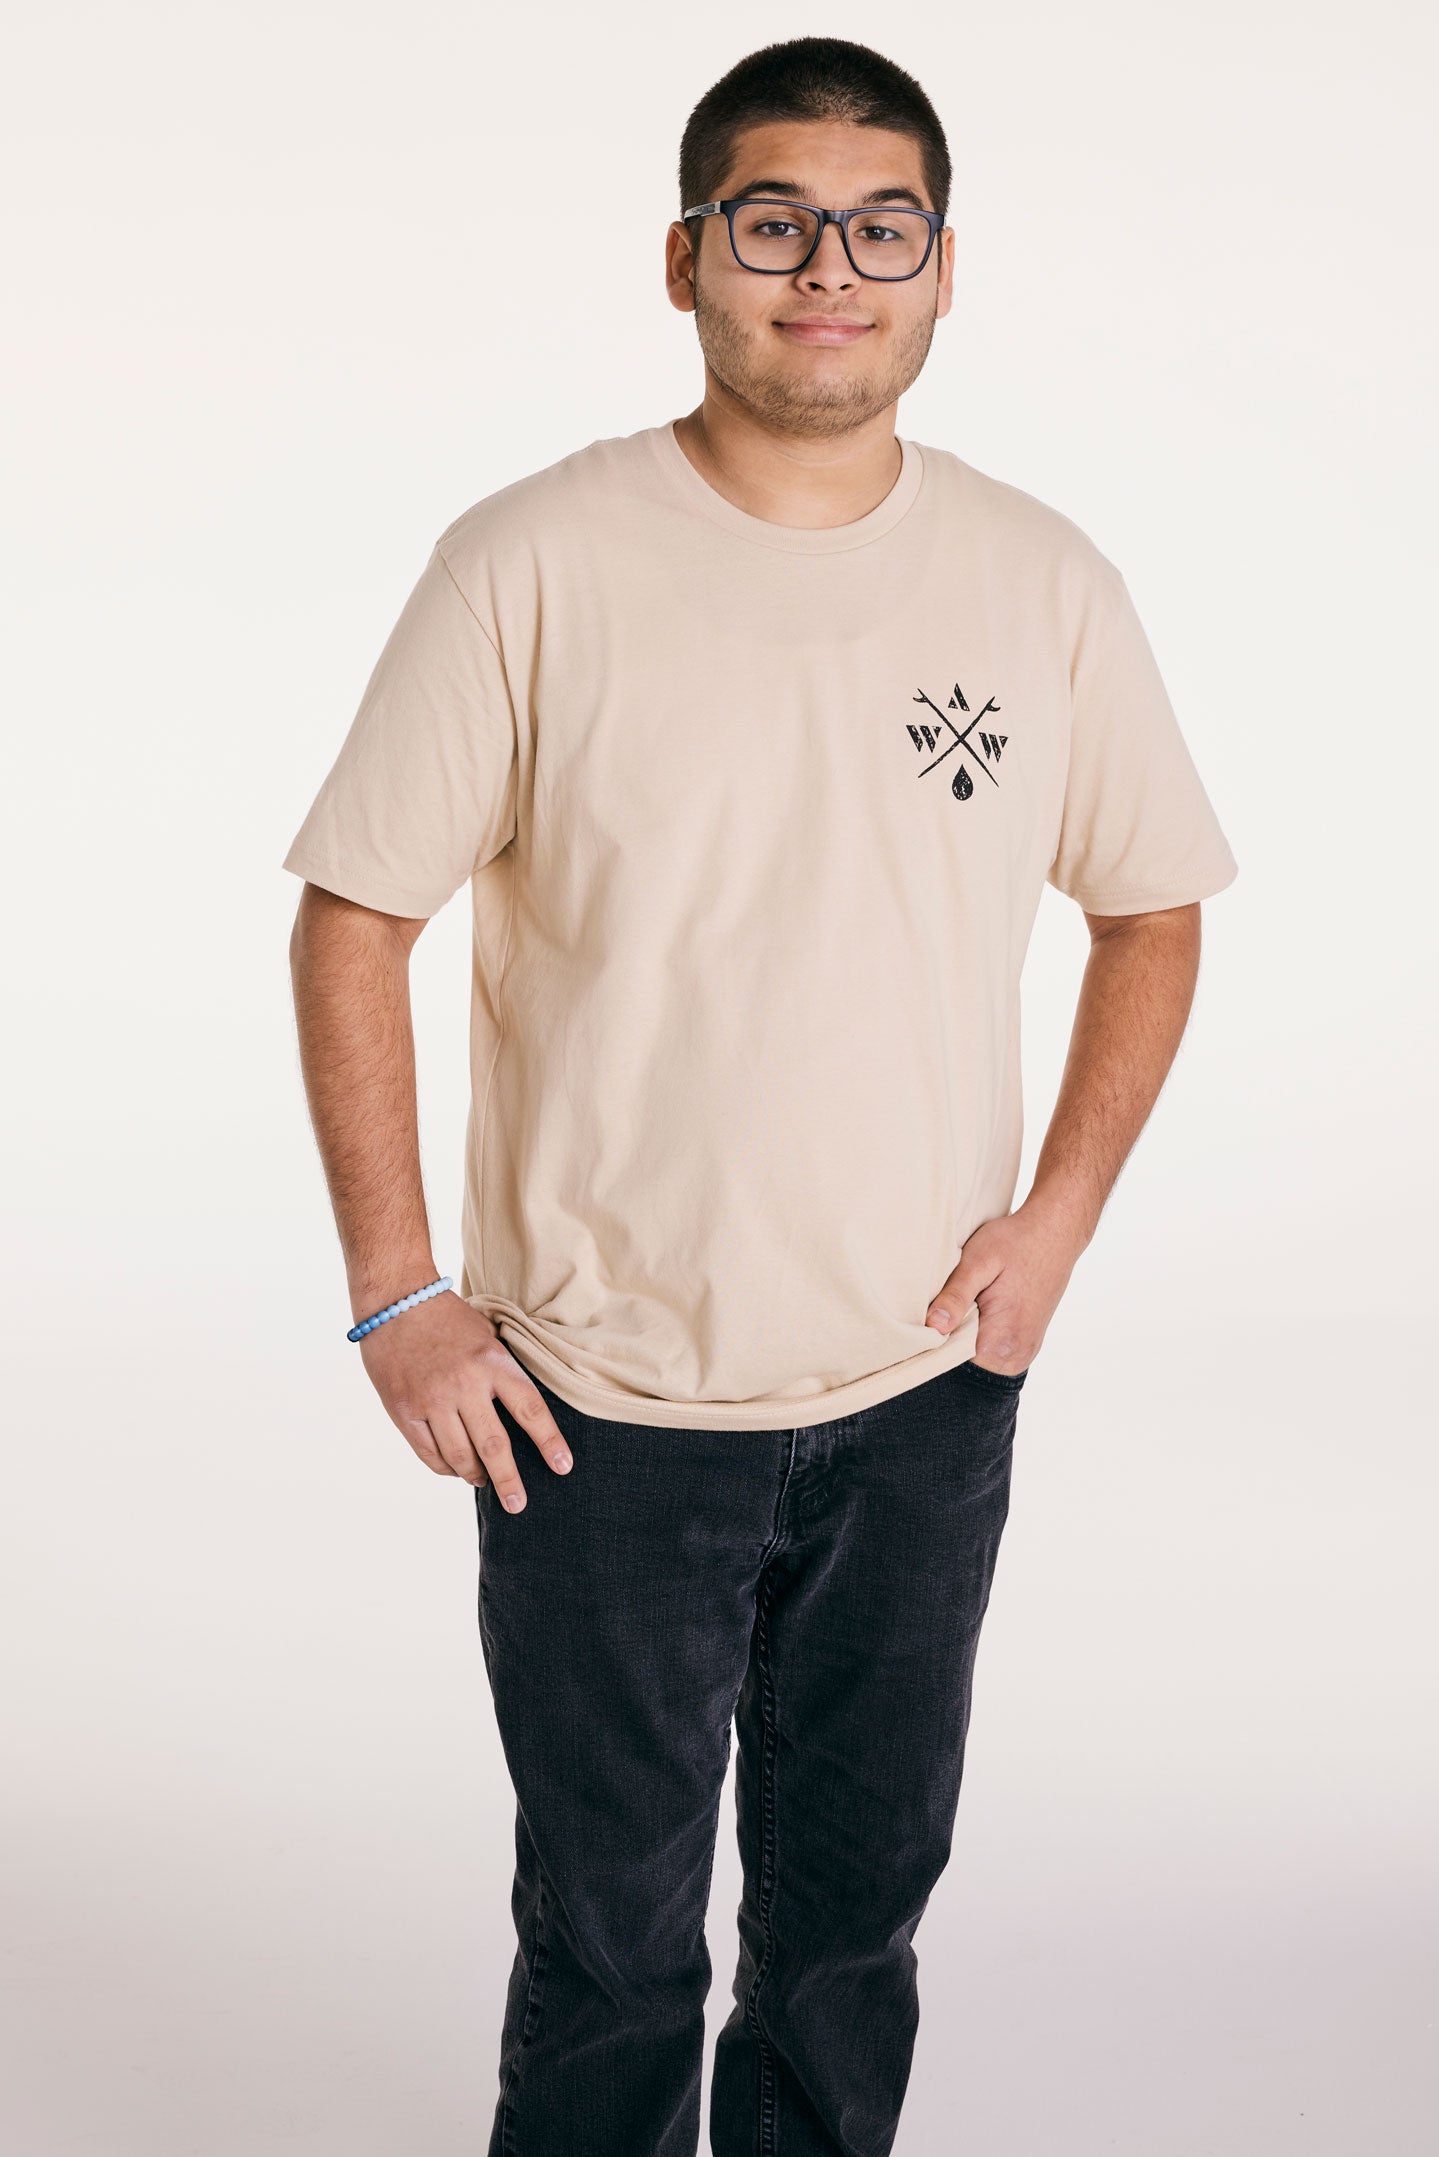 MENS AWOW OCTO TEE